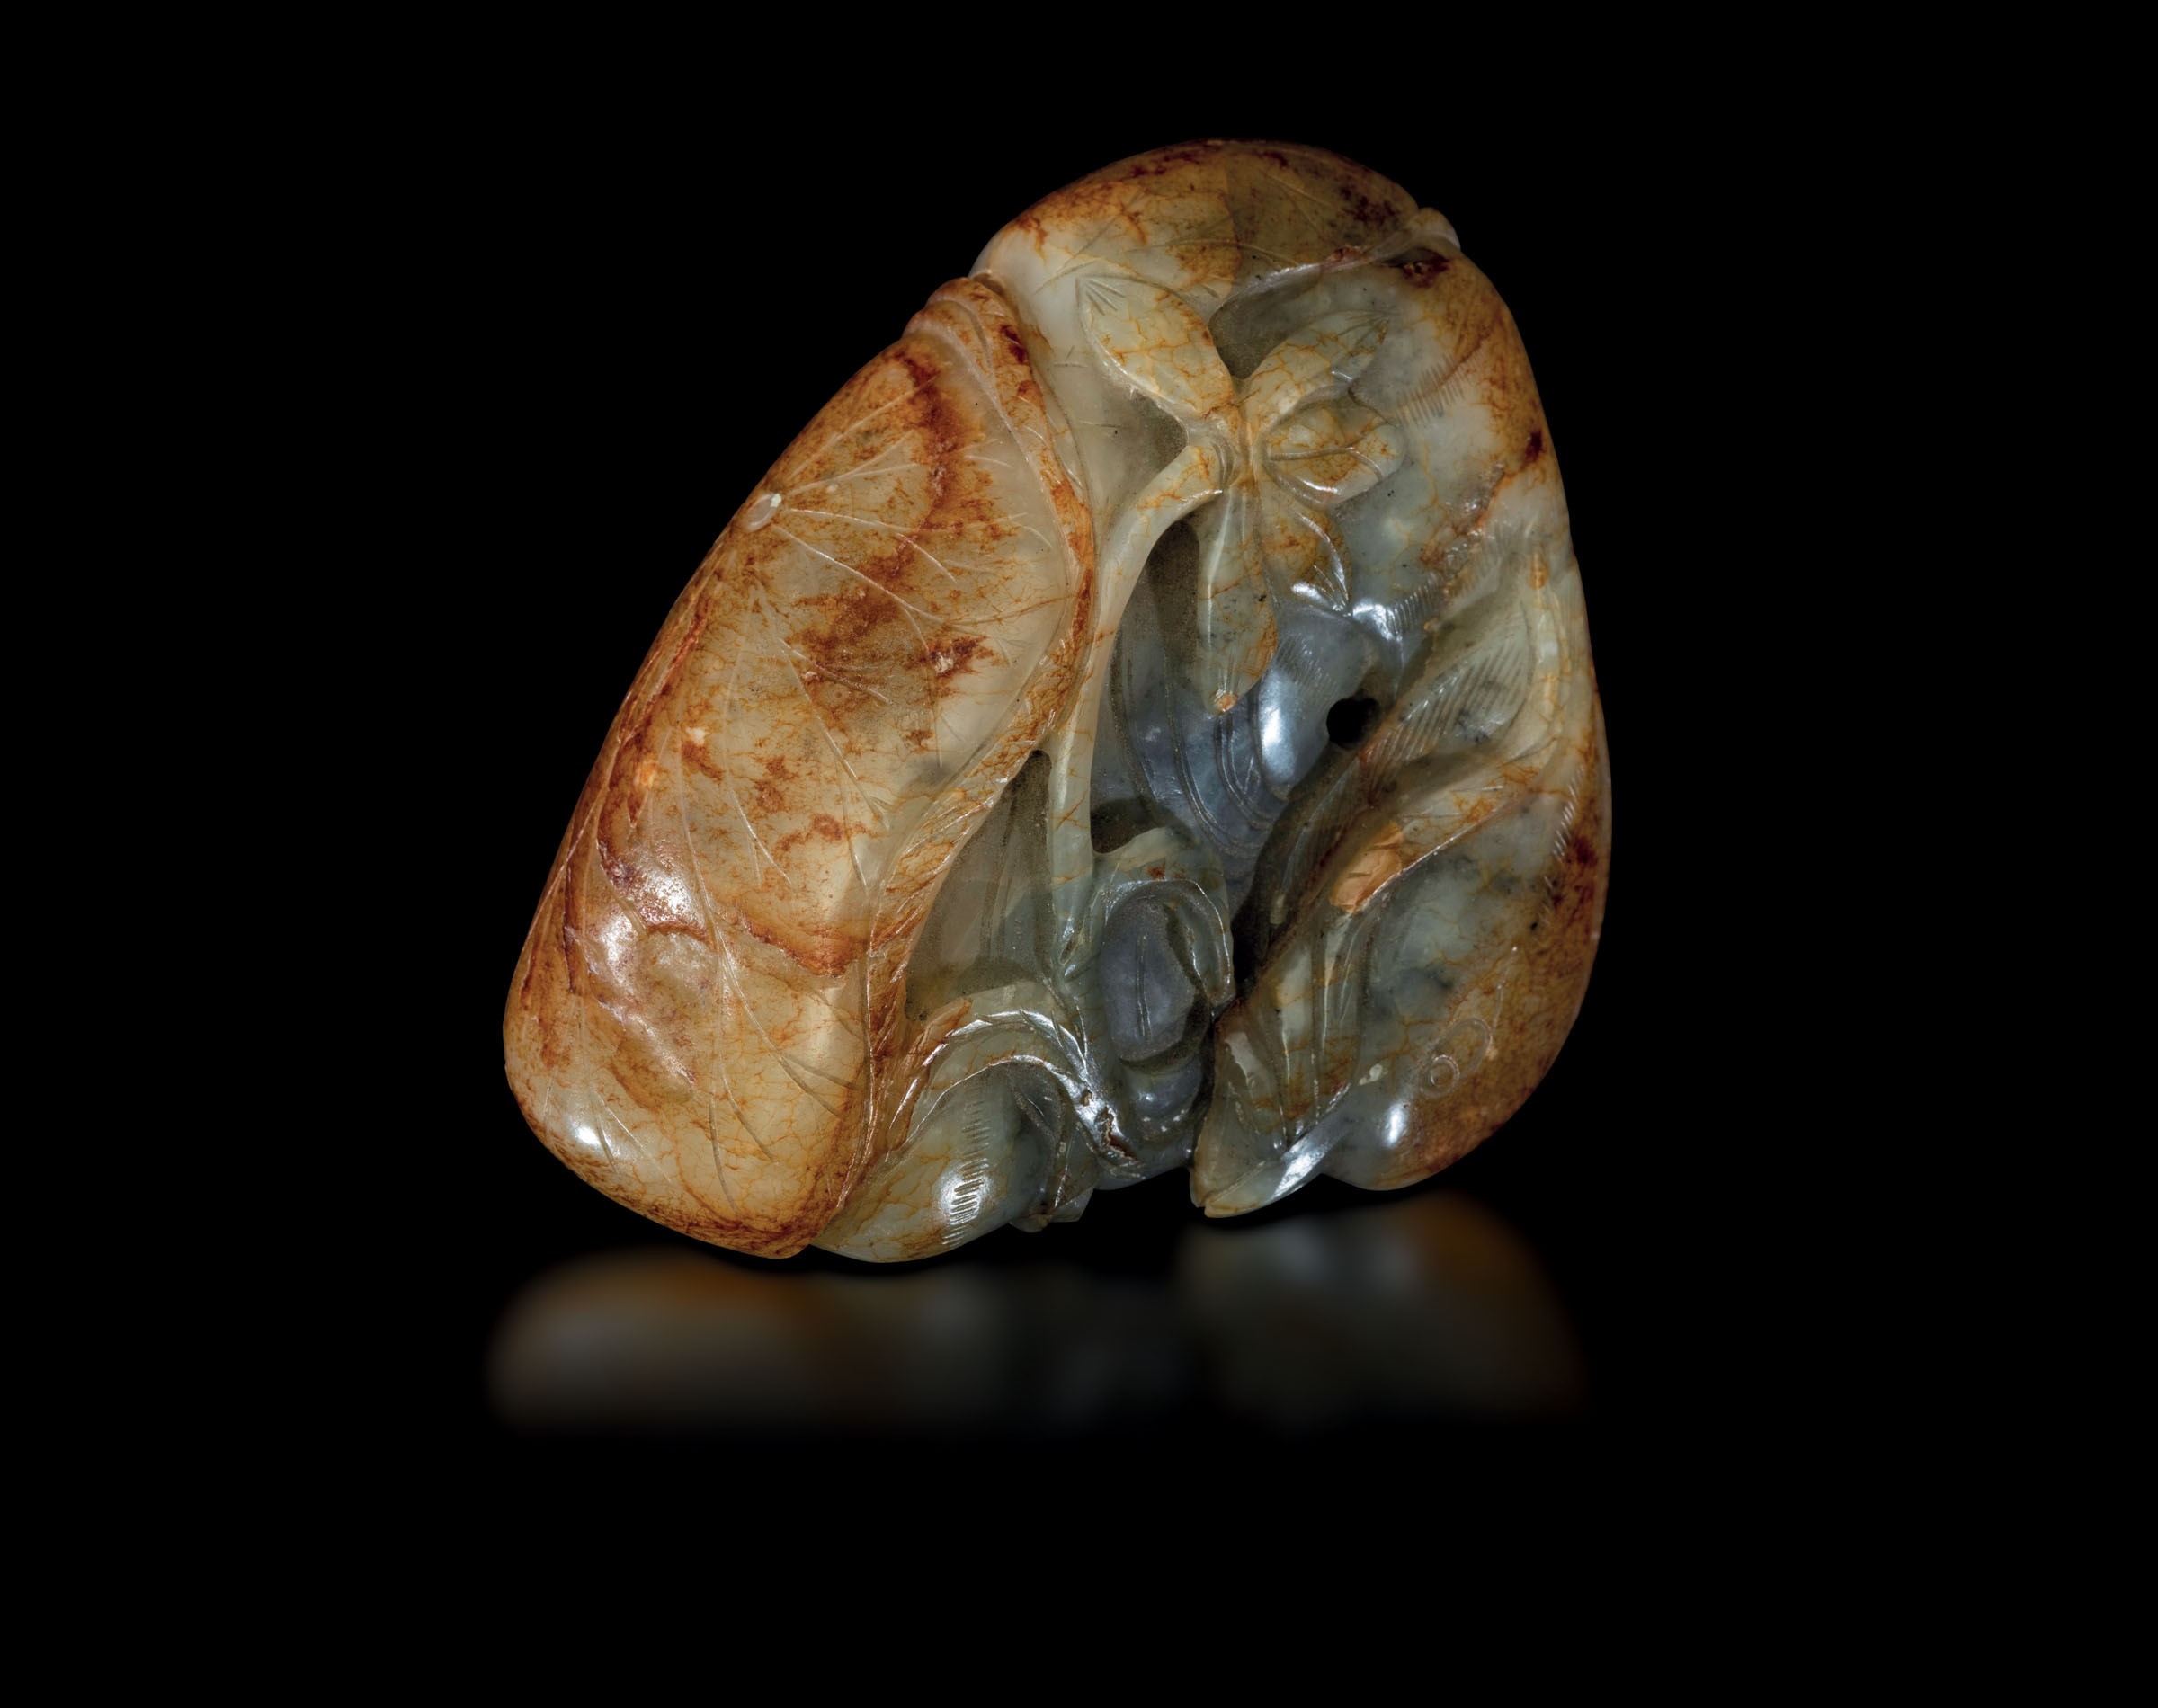 A jade and russet group, China, Qing Dynasty - Qianlong period (1736-1796). 7.5x9.5cm -